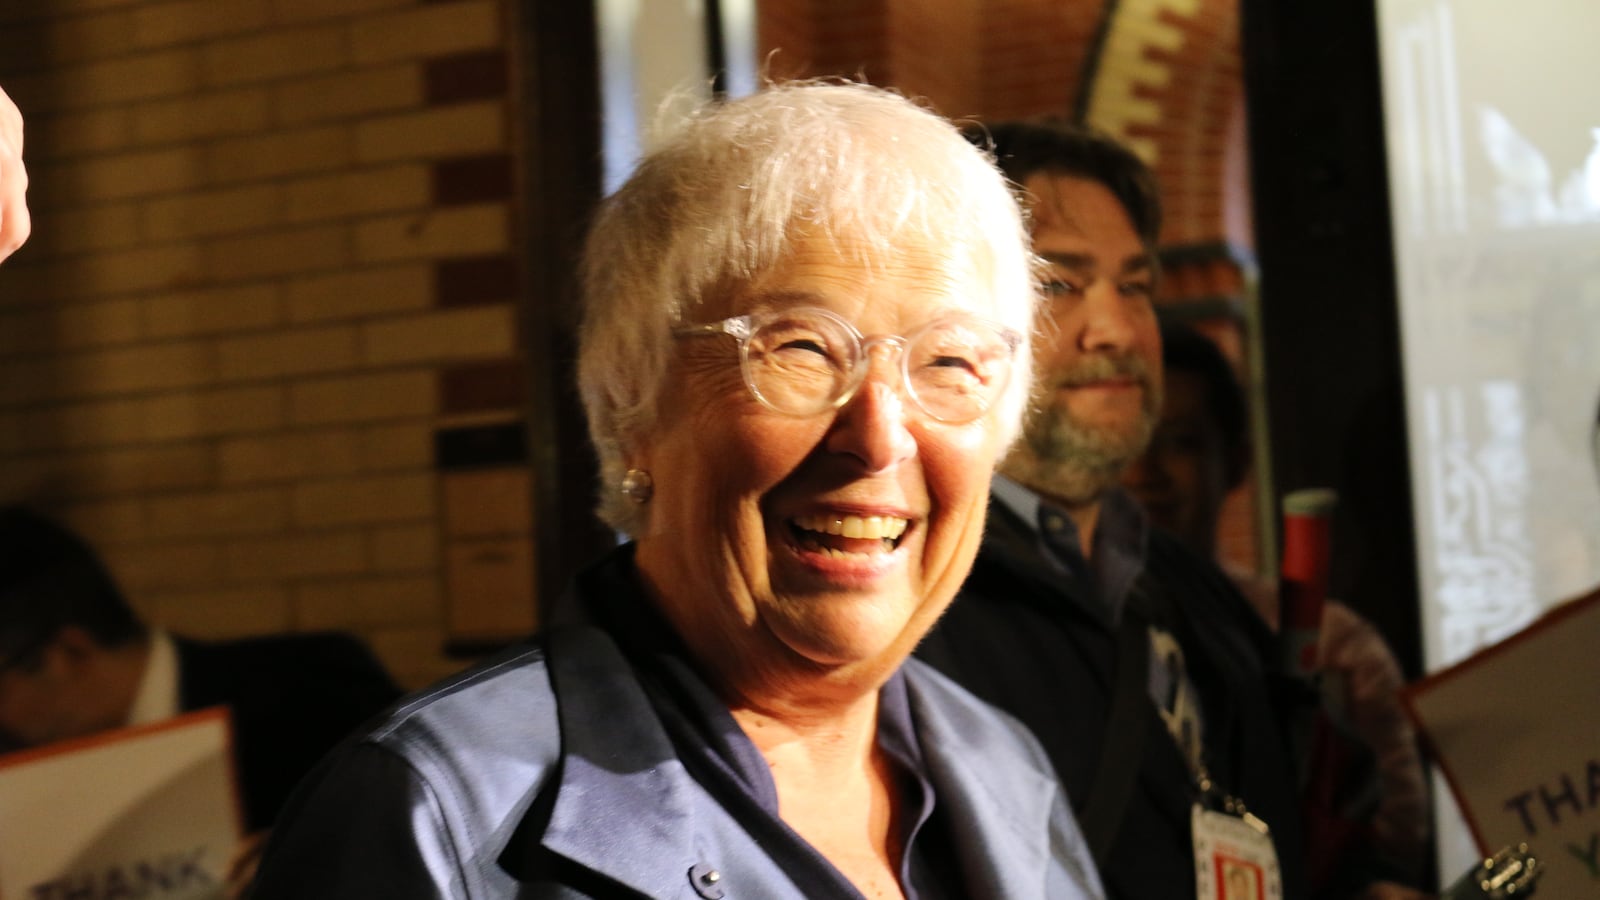 City staffers sent off Carmen Fariña at the education department headquarters after four years as chancellor, and more than 50 in the New York City school system.